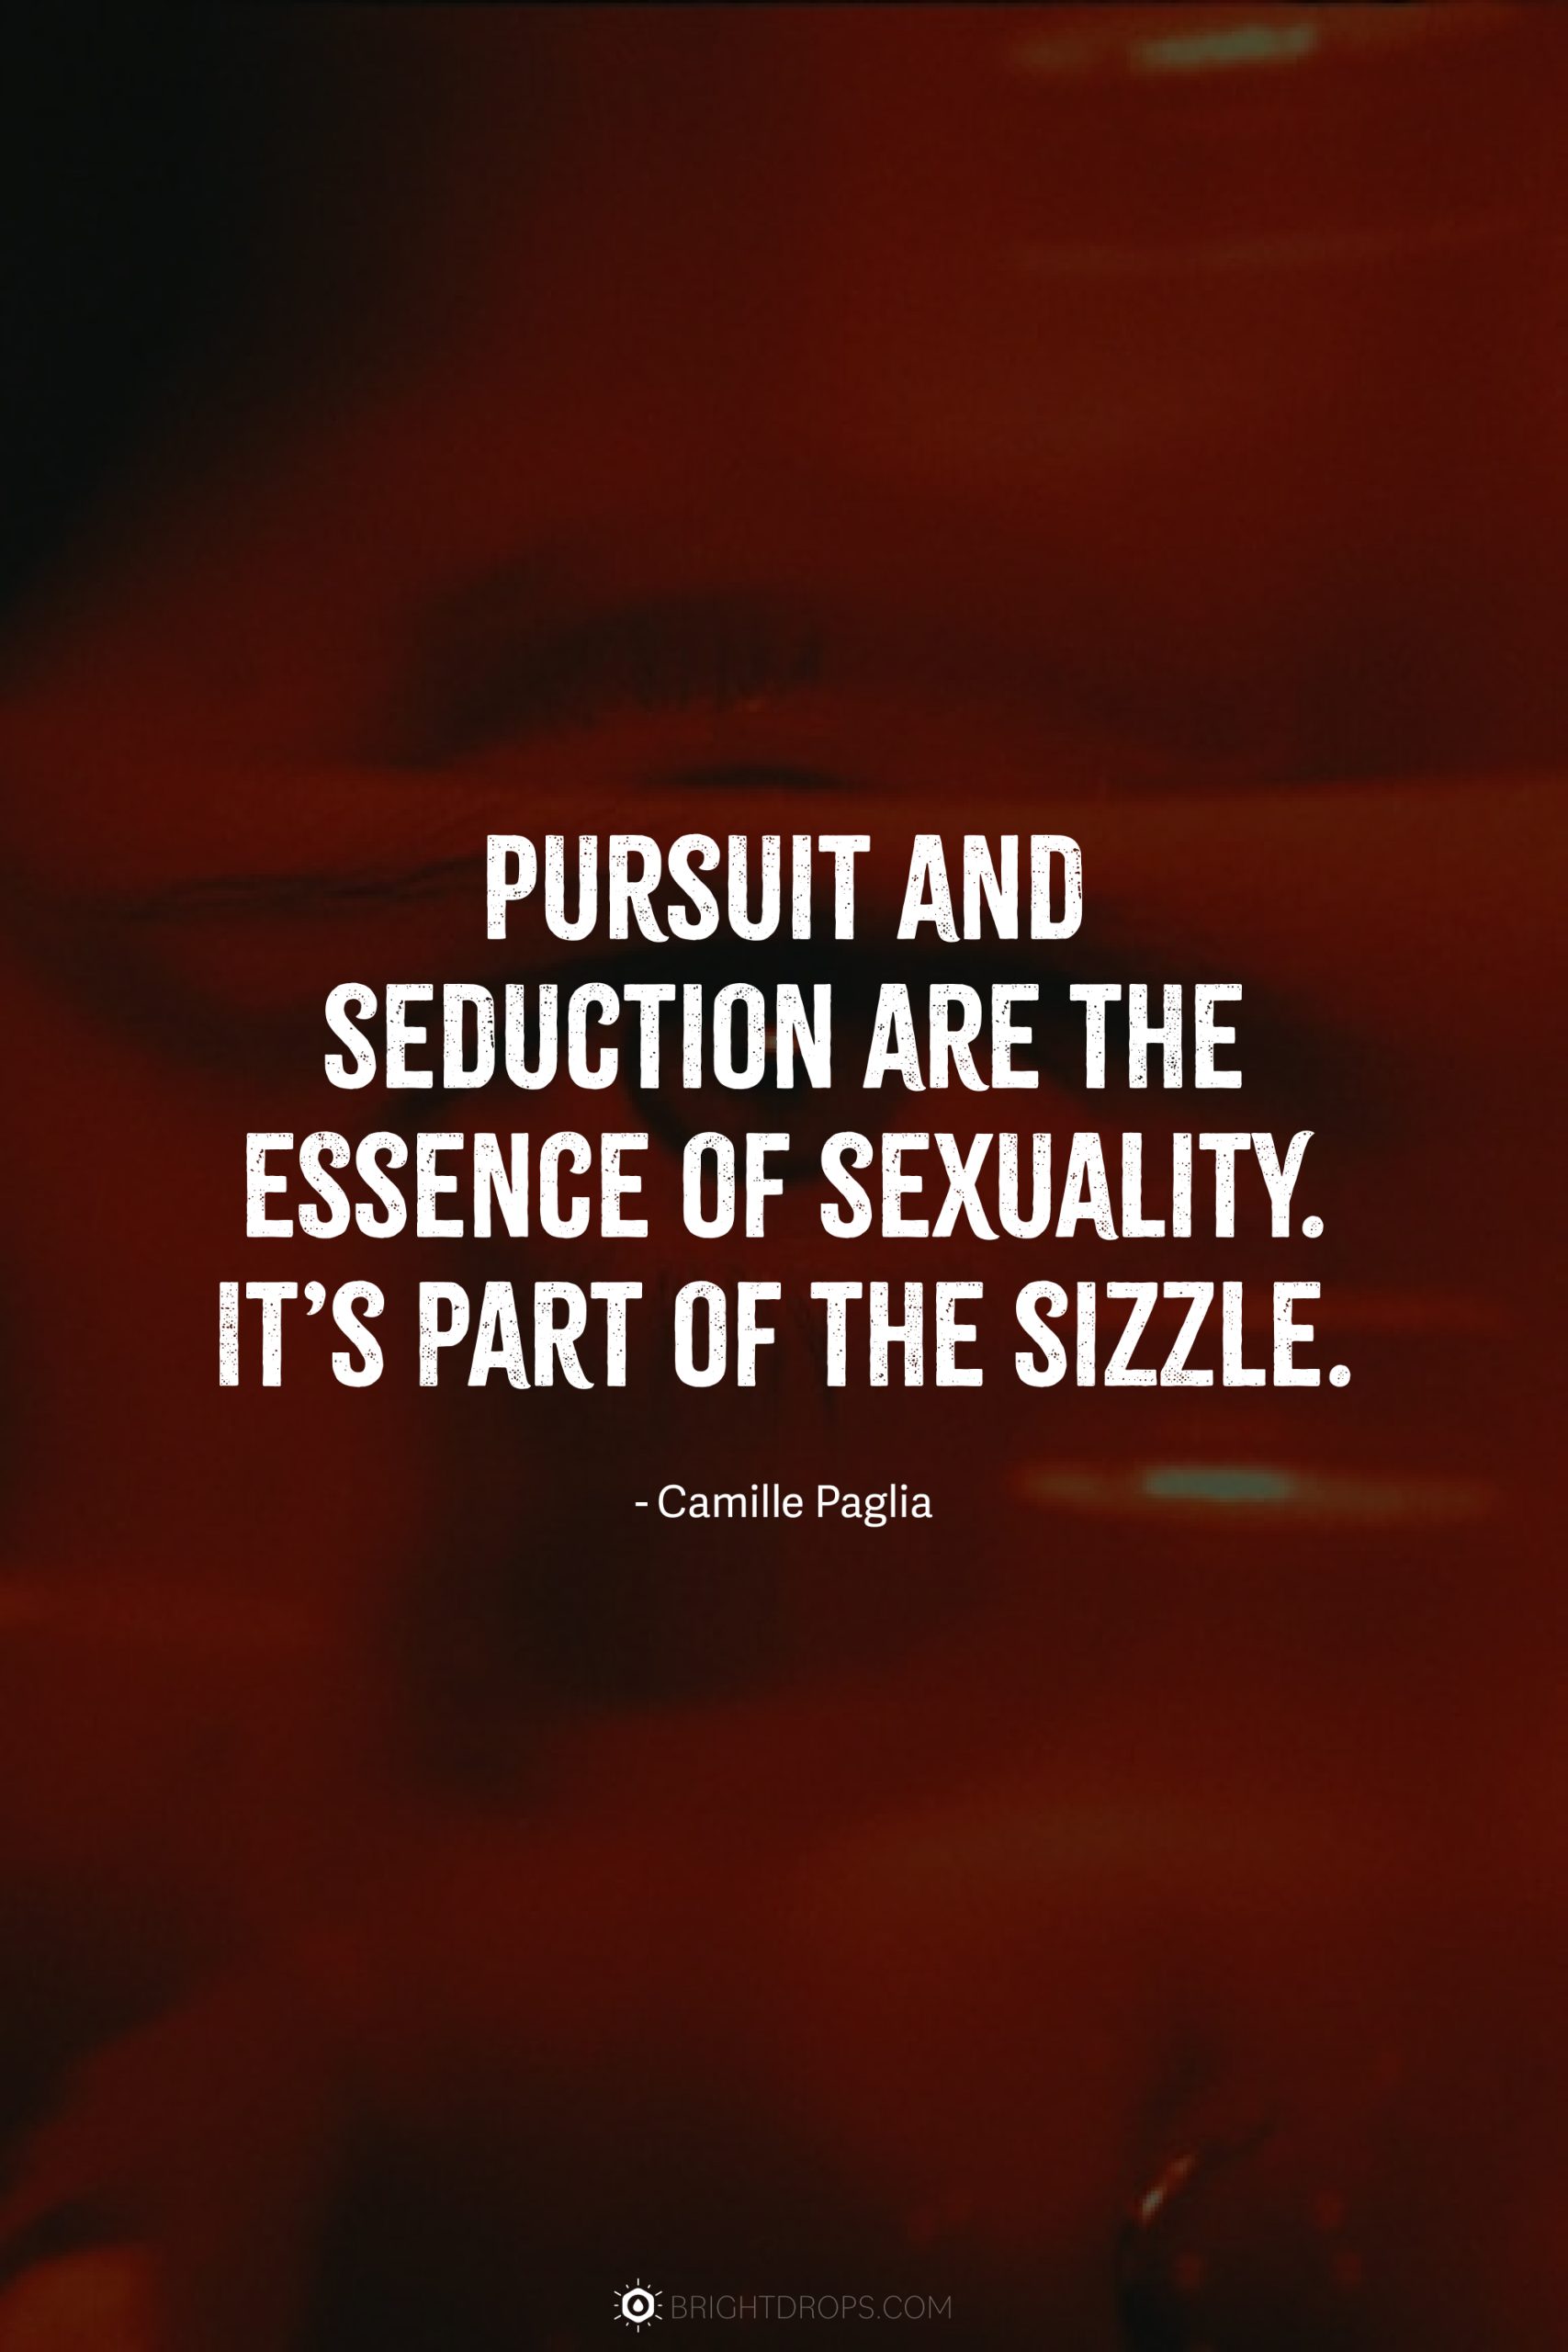 Pursuit and seduction are the essence of sexuality. It’s part of the sizzle.